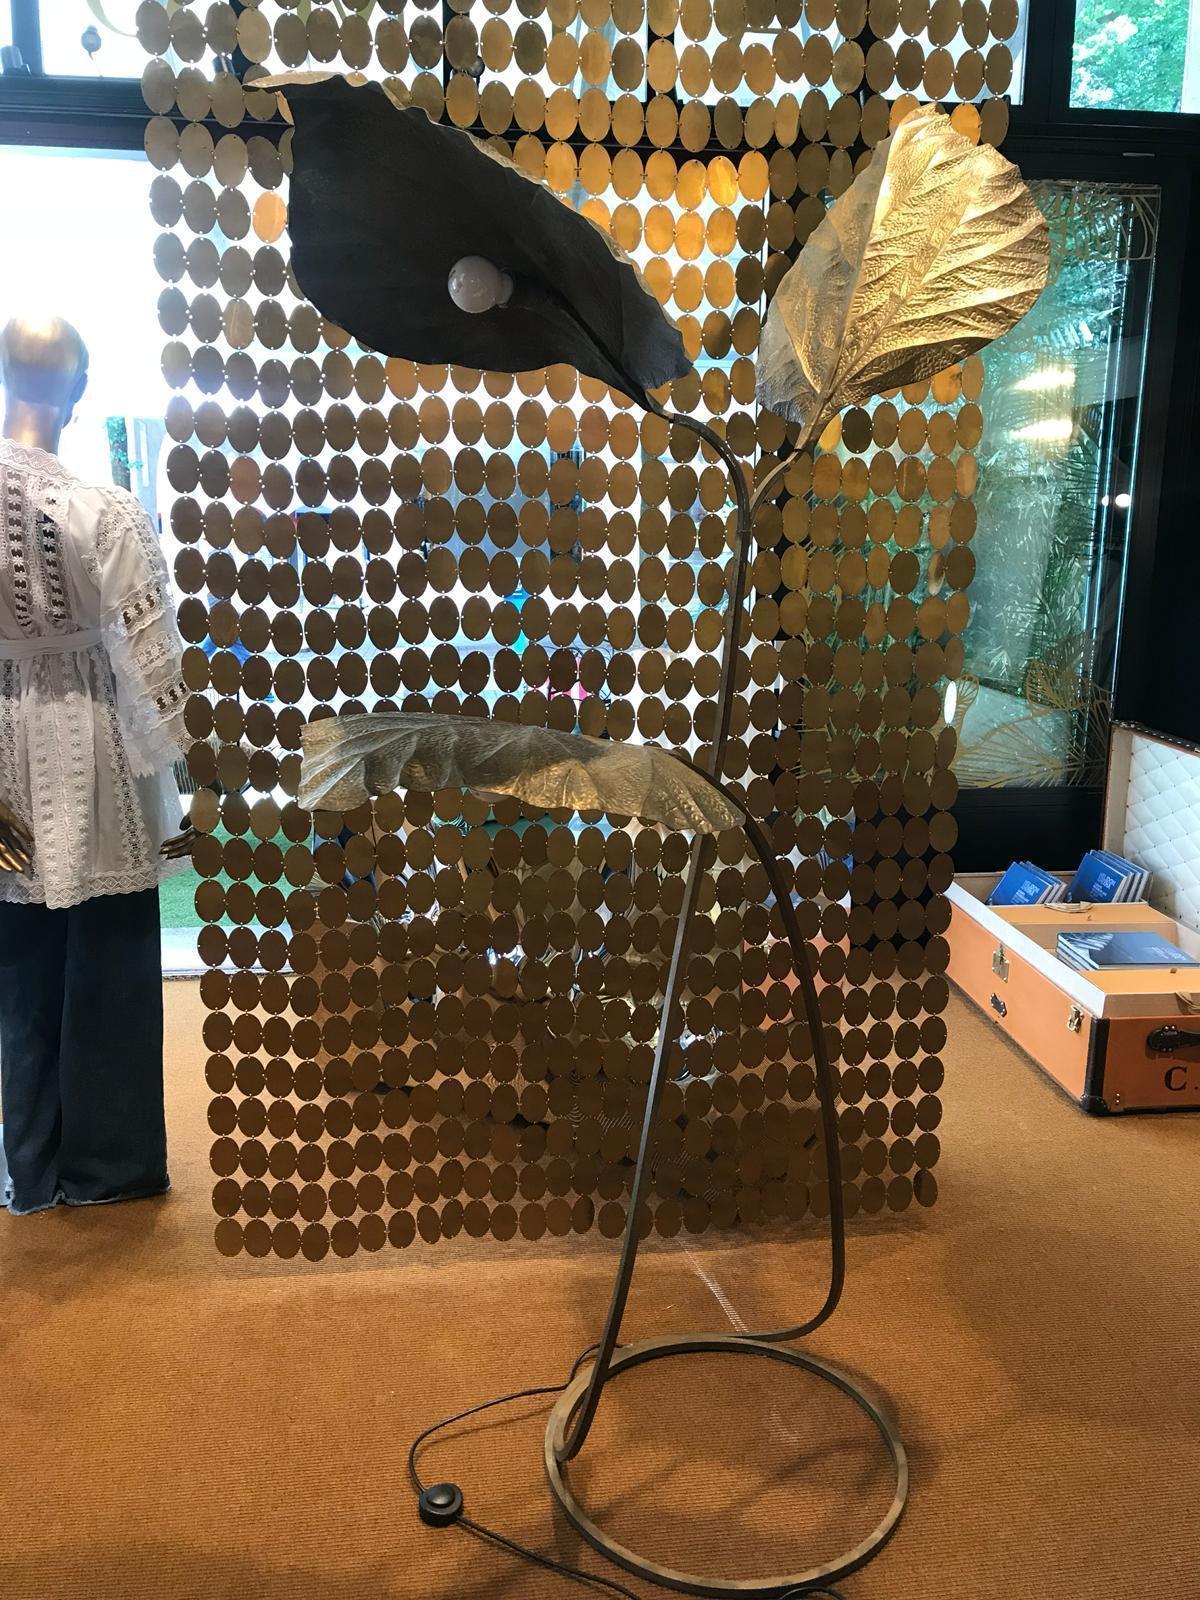 One of the most famous works of Tommaso Barbi, the leafs lamps.
This is the 3 leafs floor lamp model, made in Italy in the 1970

It's possible to turn the leaves in the direction you prefer if you don't like the actual one,
but you need to